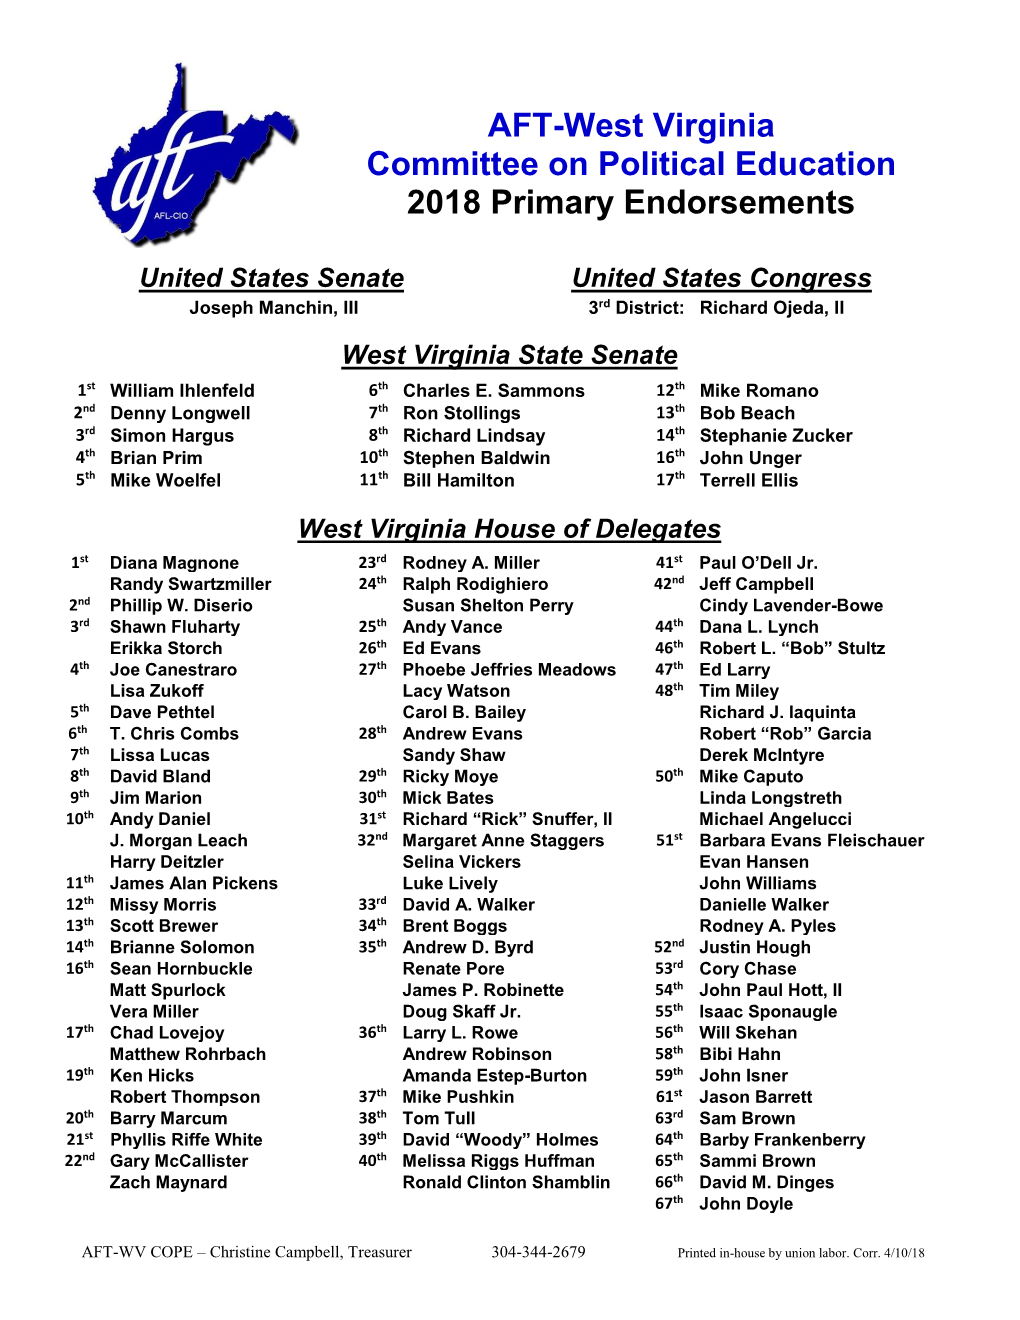 AFT-West Virginia Committee on Political Education 2018 Primary Endorsements